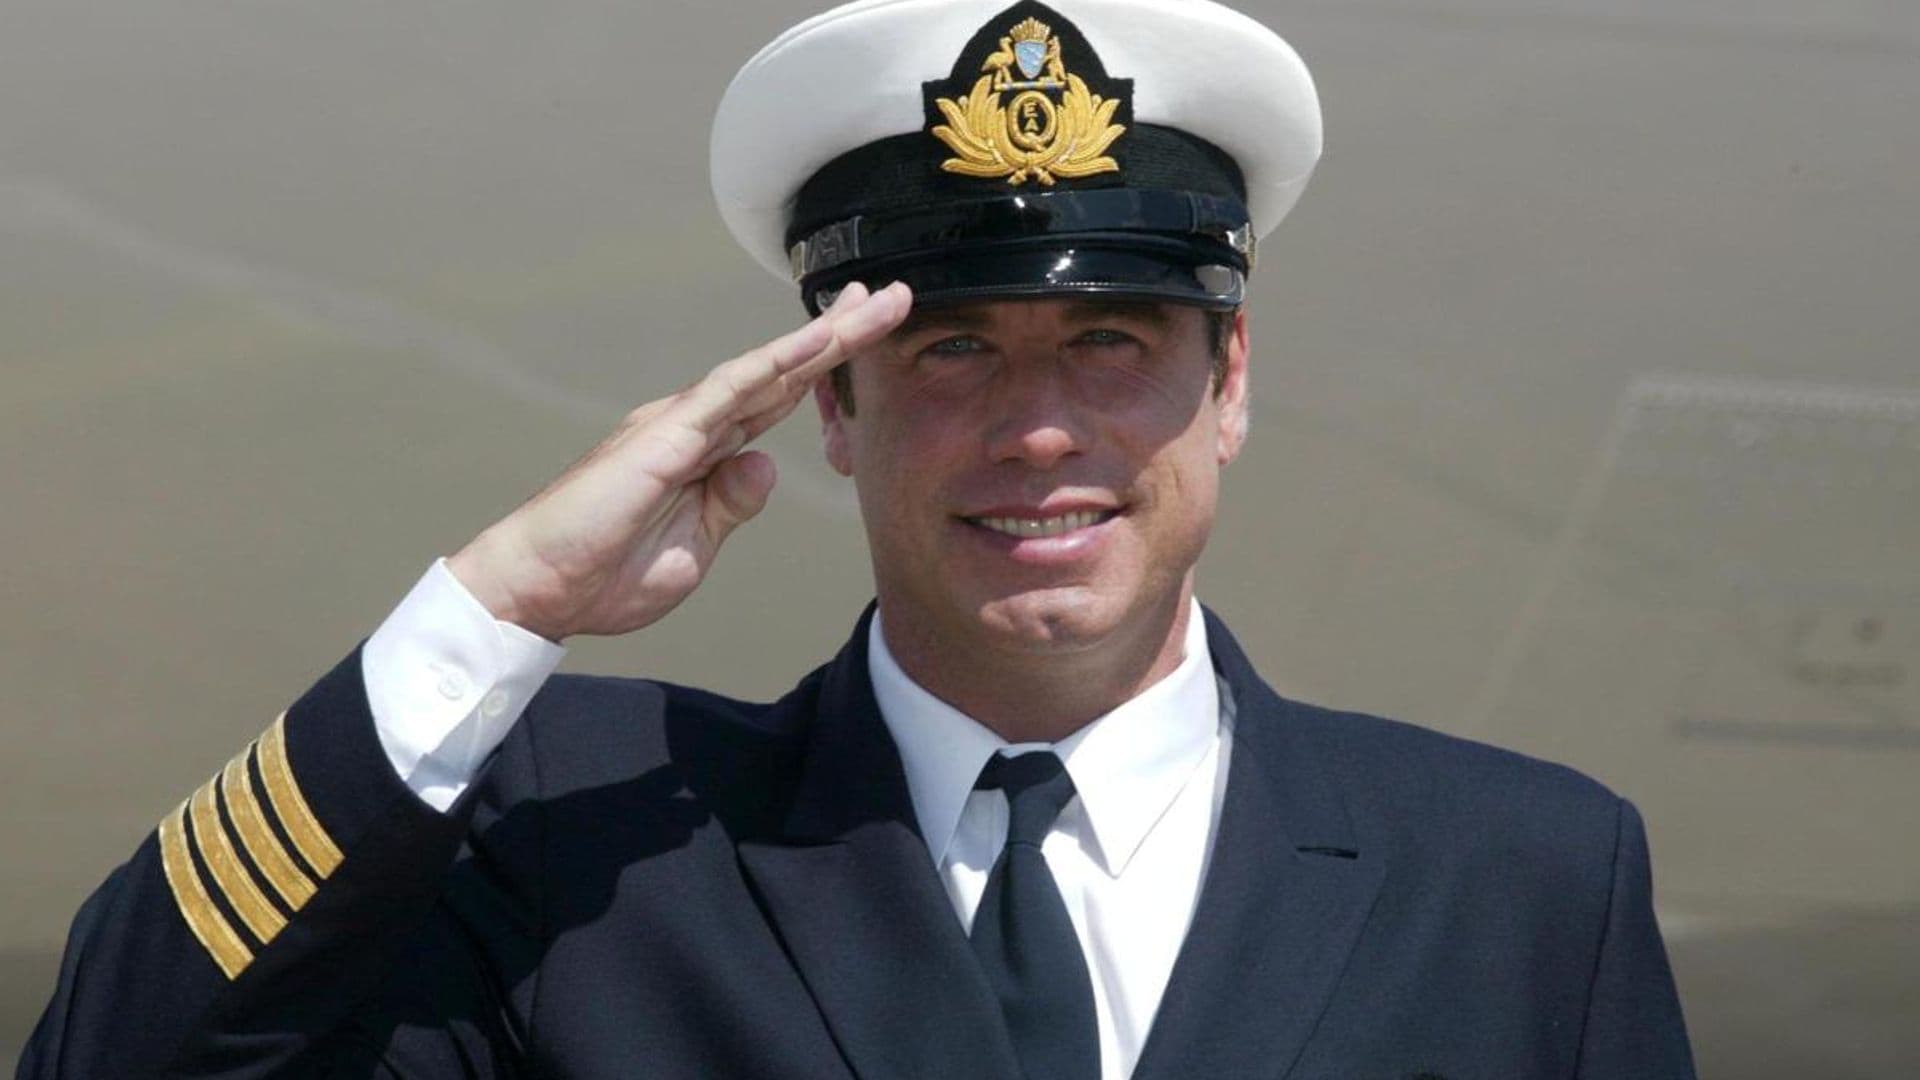 John Travolta excited to receive license to pilot a 737 airplane: ‘a very proud moment’